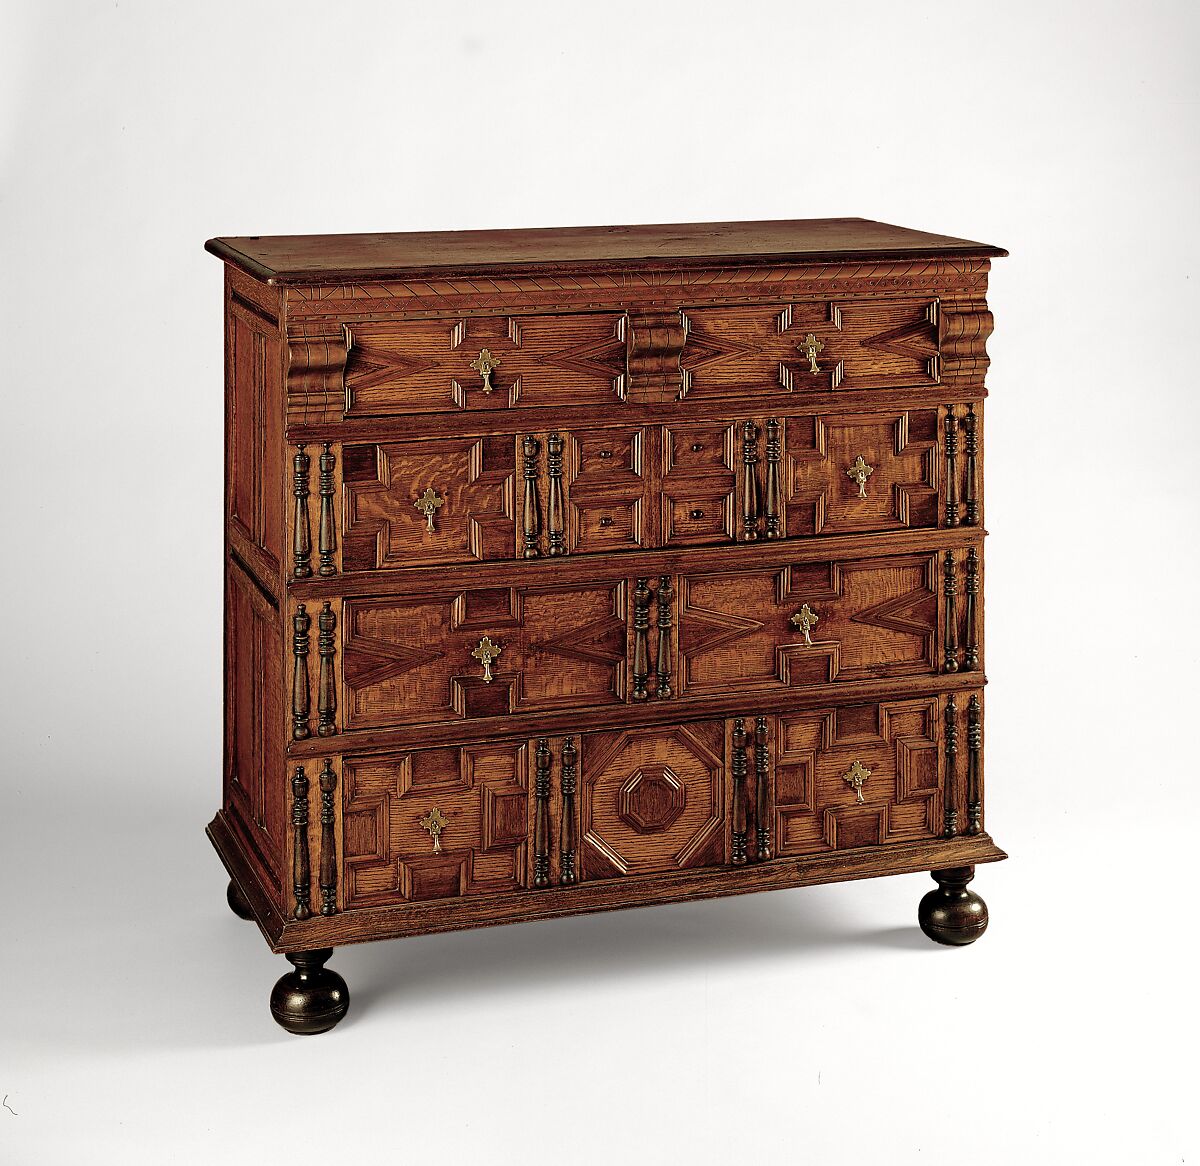 Chest of drawers, The Symonds Shop Tradition American, Red oak, walnut, cedar, maple, white pine, American